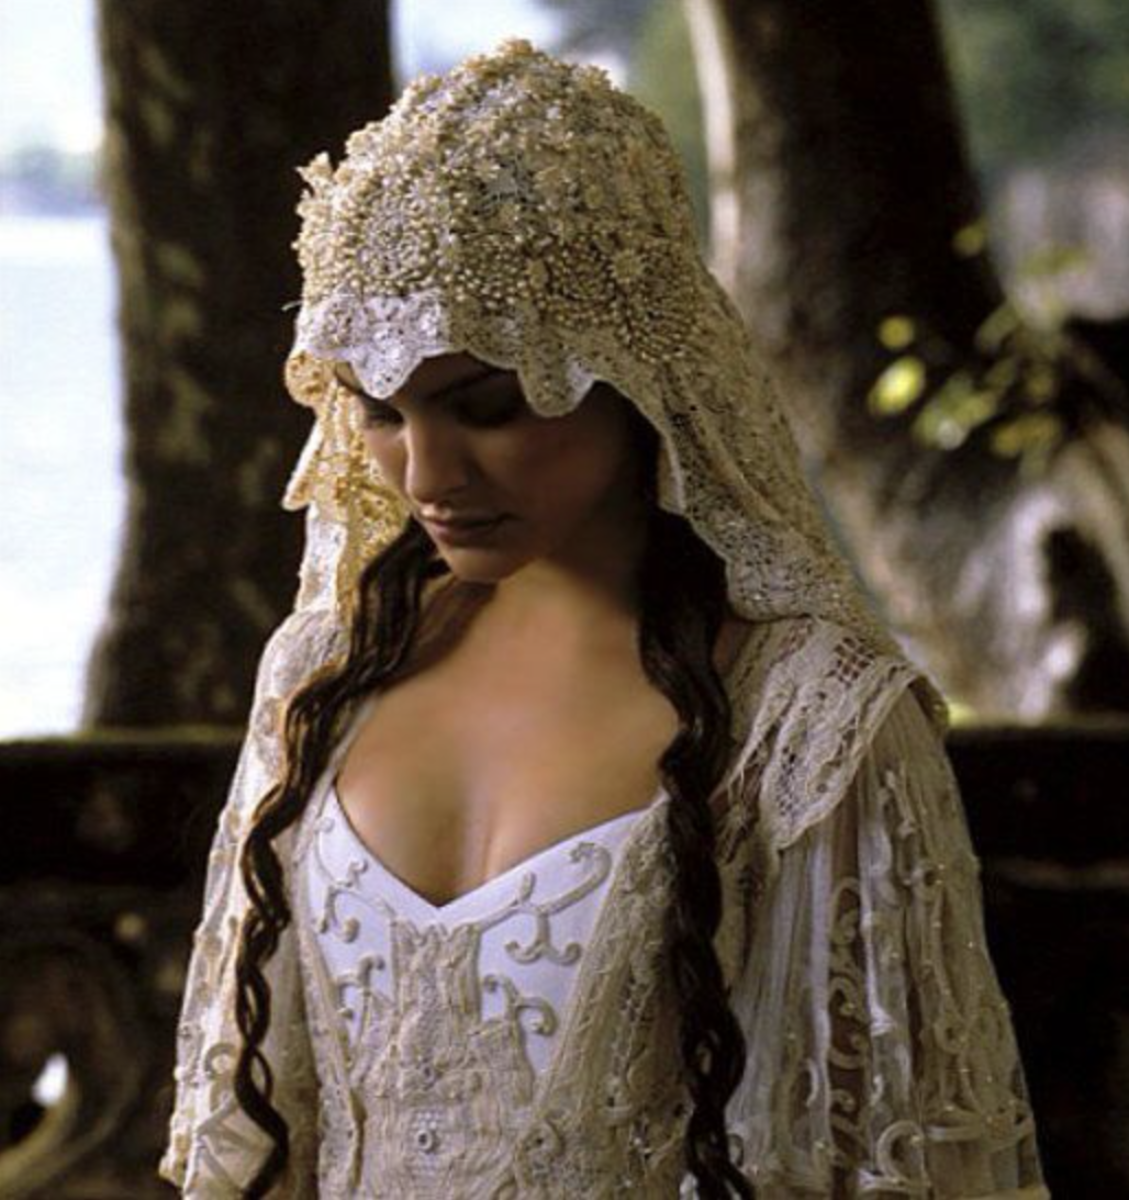 20 Best Wedding Gowns From Fantasy/Sci-Fi Movies